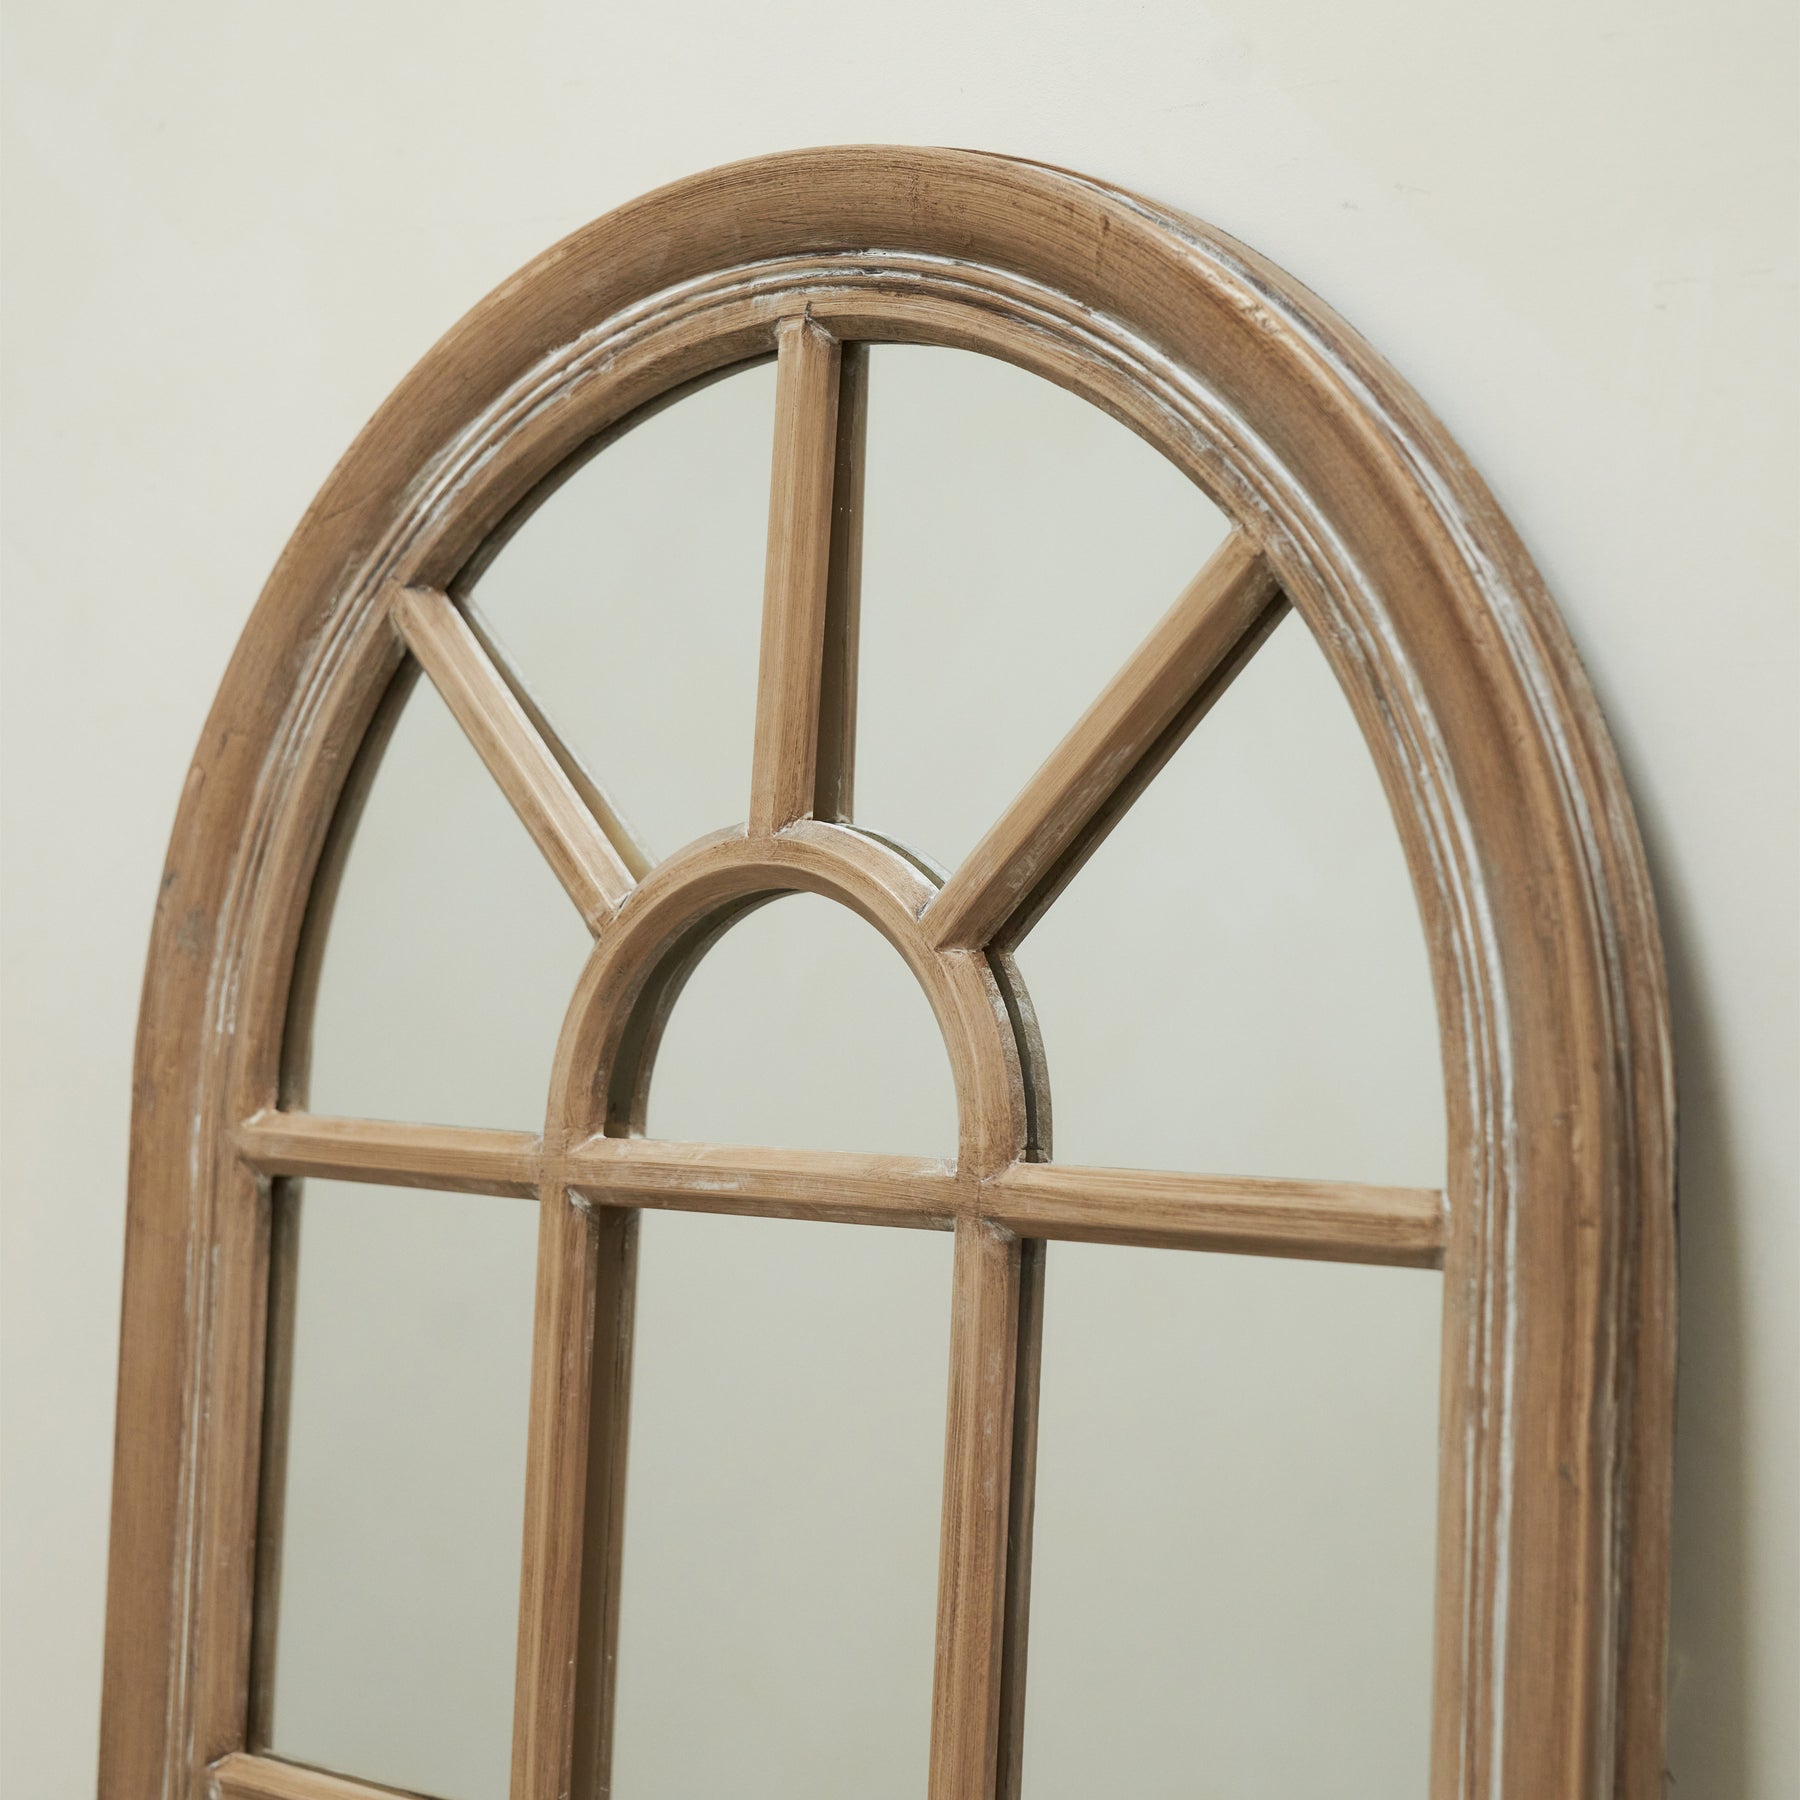 Top half of Washed Wood Arched Shabby Chic Window Mirror